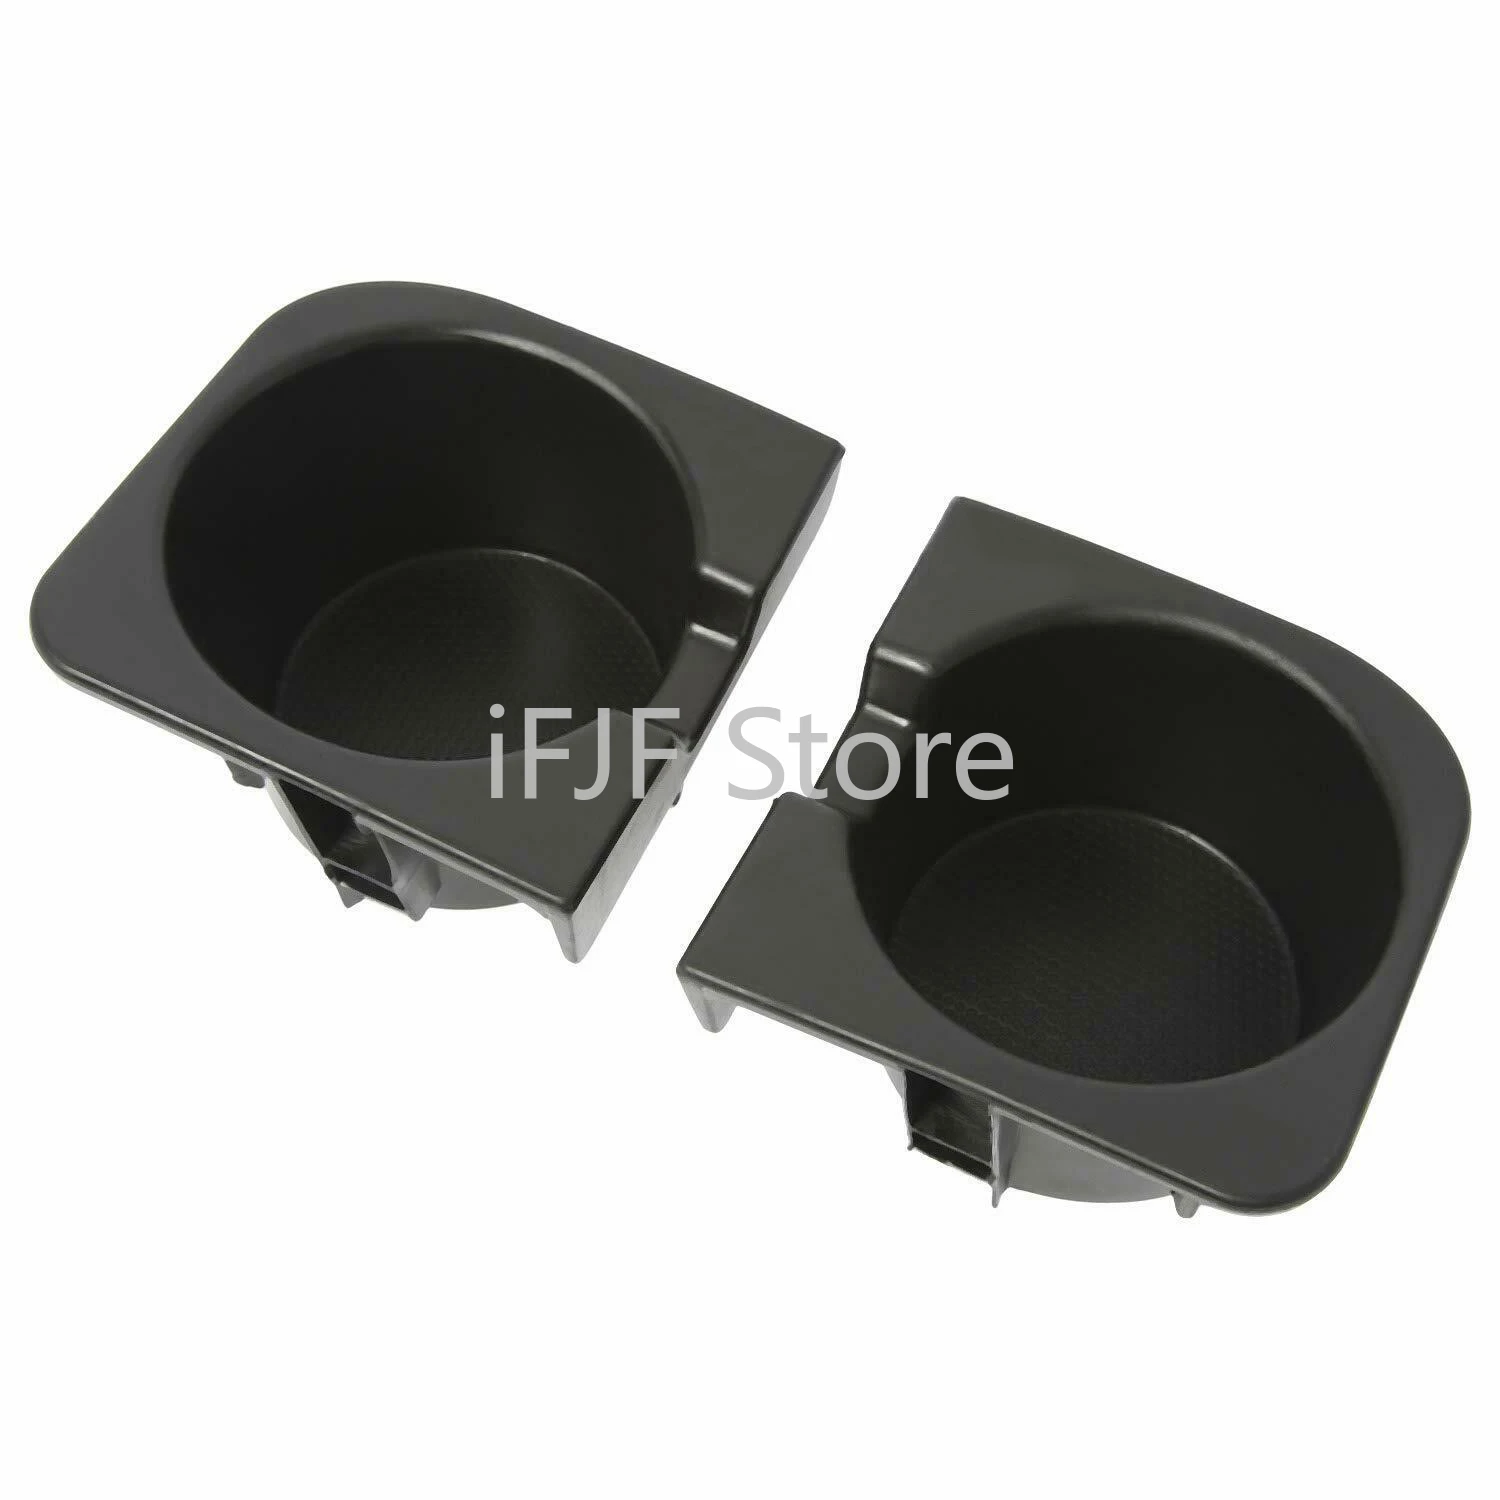 

Cup Holder Insert for 05-17 Toyota Tacoma (Left & Right Pair) Replaces 66991-04012 & 66992-04012 Front Seat Center Console Liner